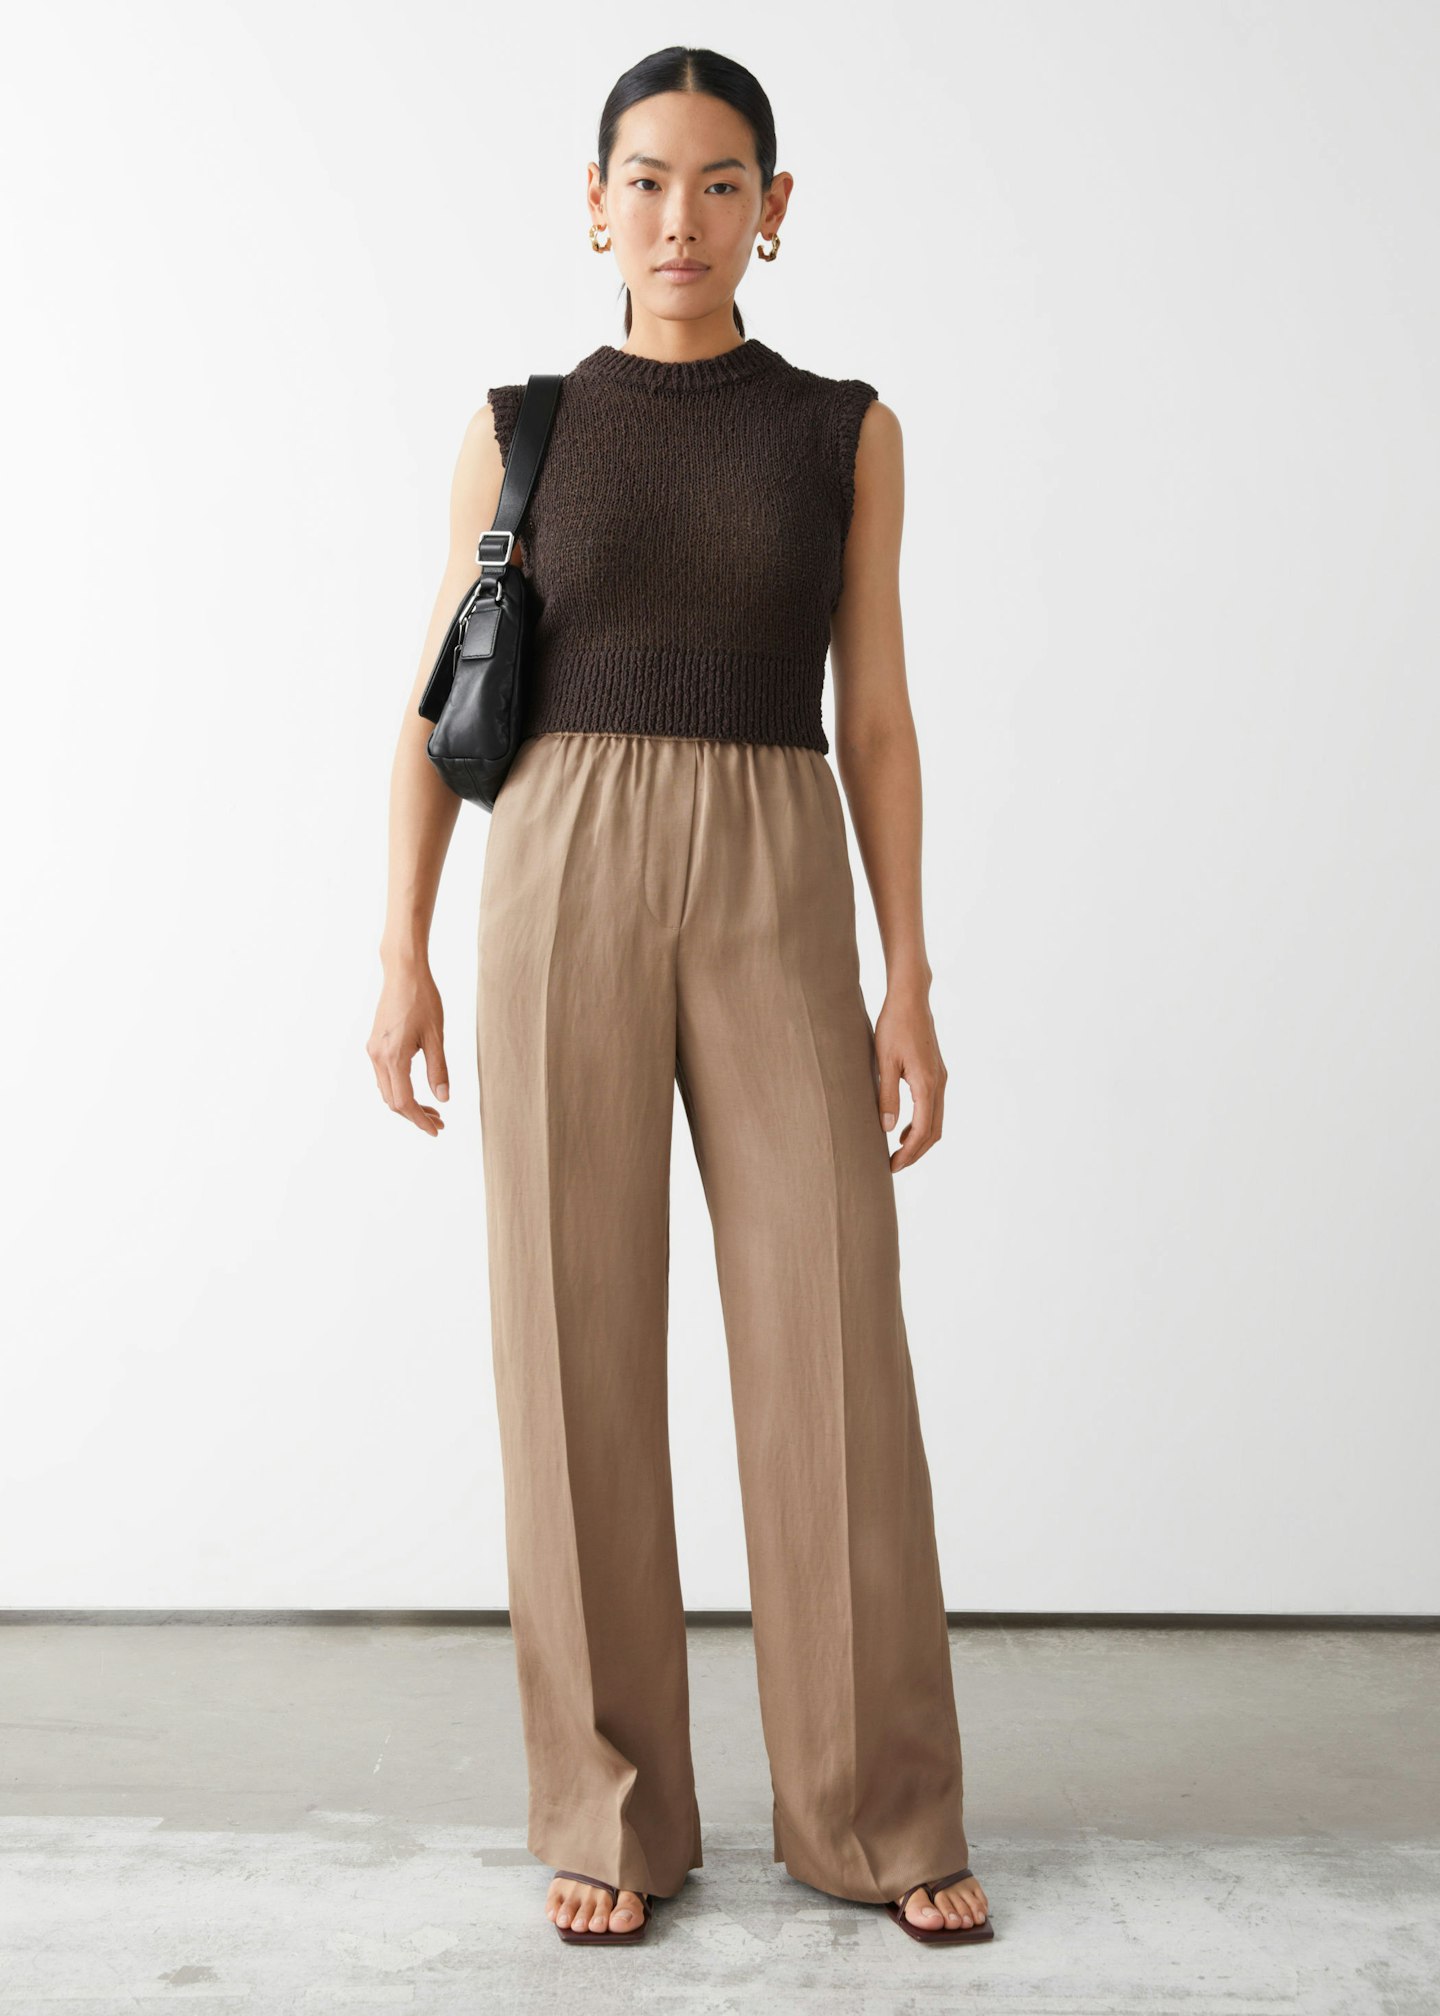 & Other Stories, Wide-Flared Trousers, £75